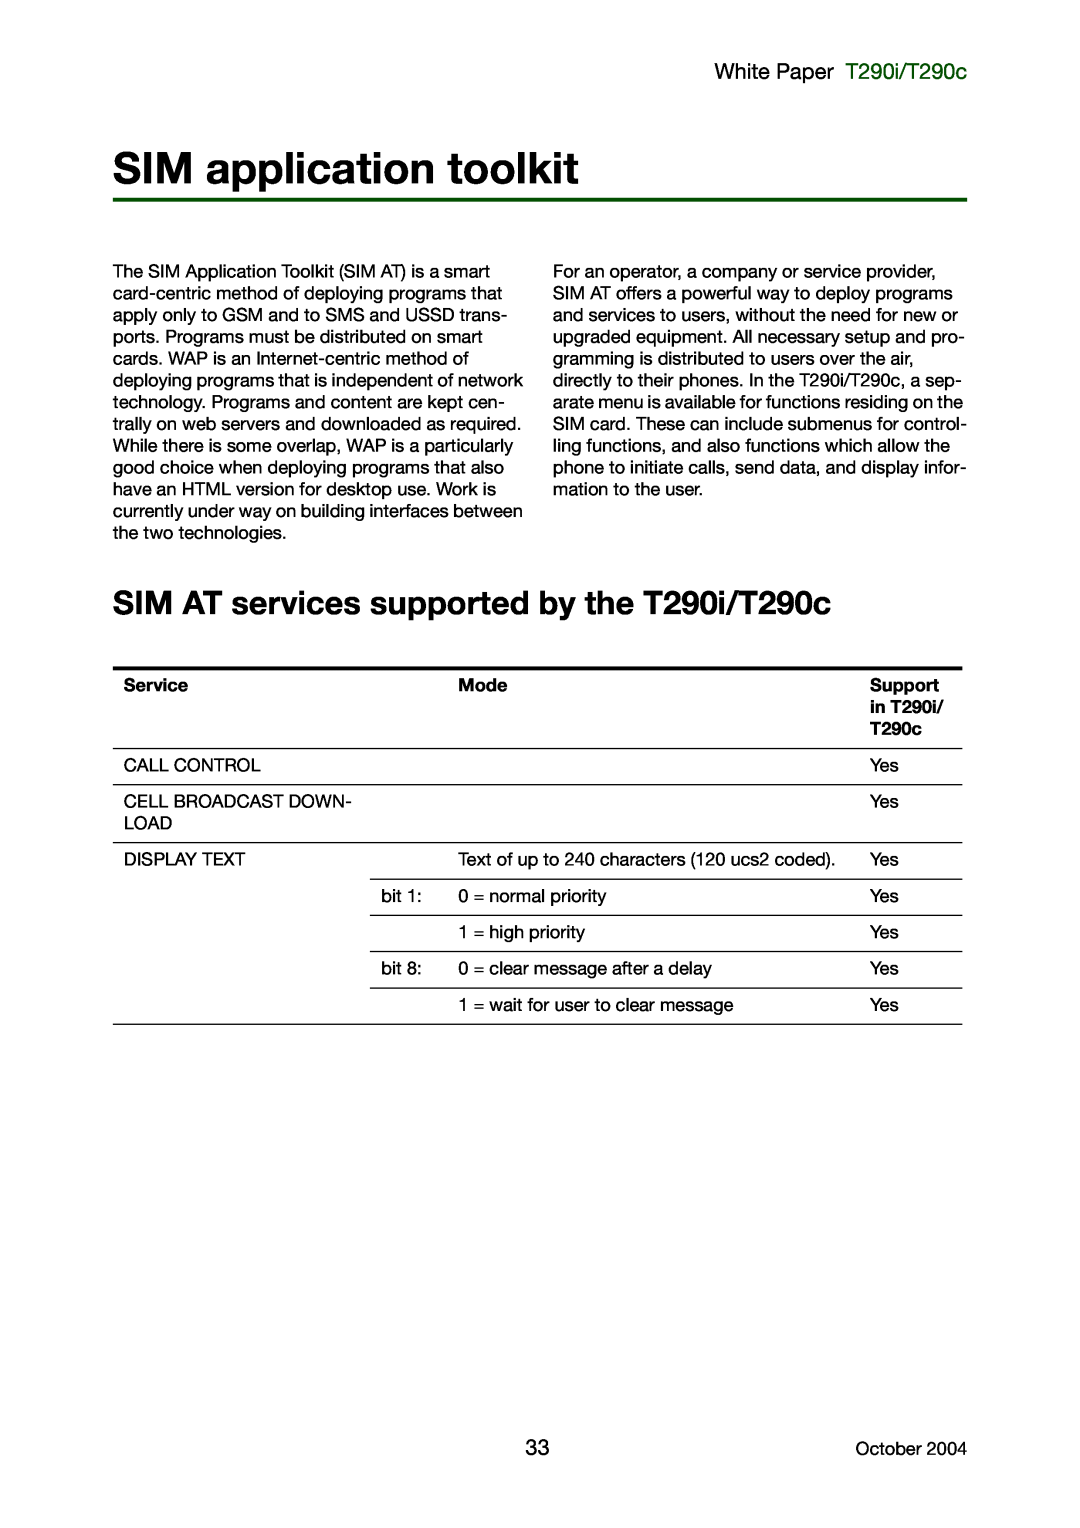 Sony Ericsson manual SIM application toolkit, SIM AT services supported by the T290i/T290c, White Paper T290i/T290c 